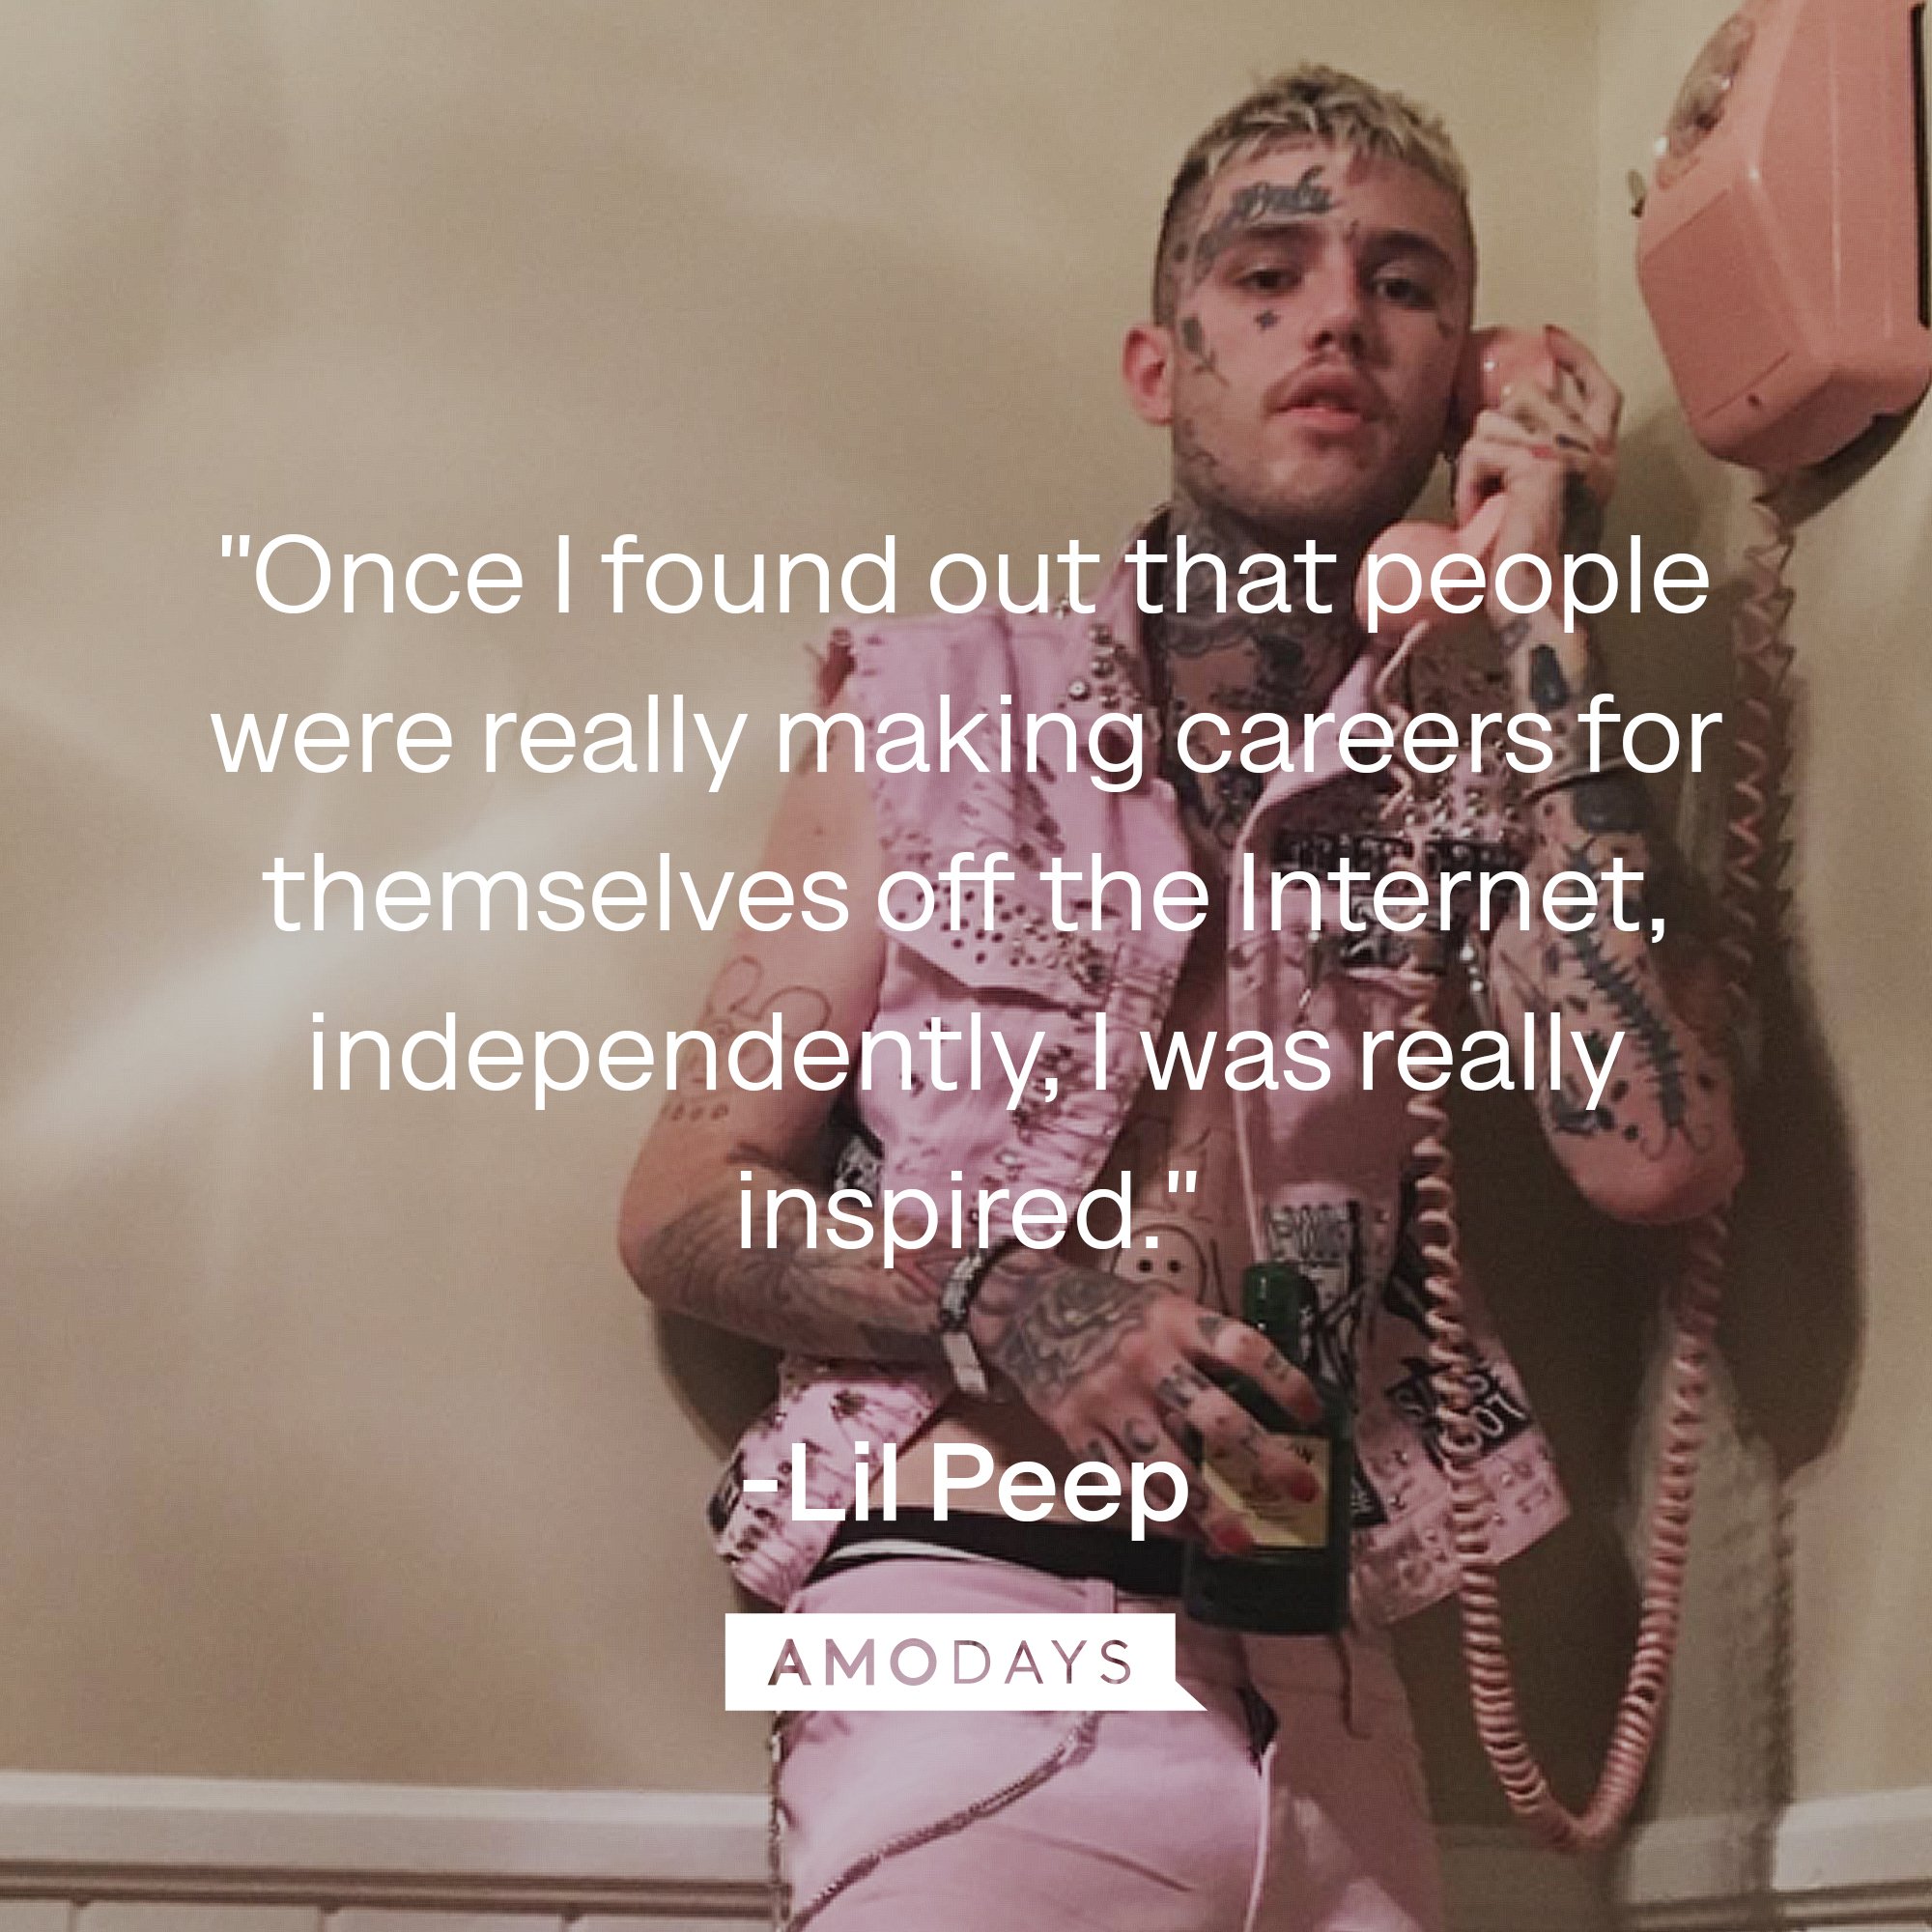 Lil Peep's quote: "Once I found out that people were really making careers for themselves off the Internet, independently, I was really inspired." | Image: AmoDays